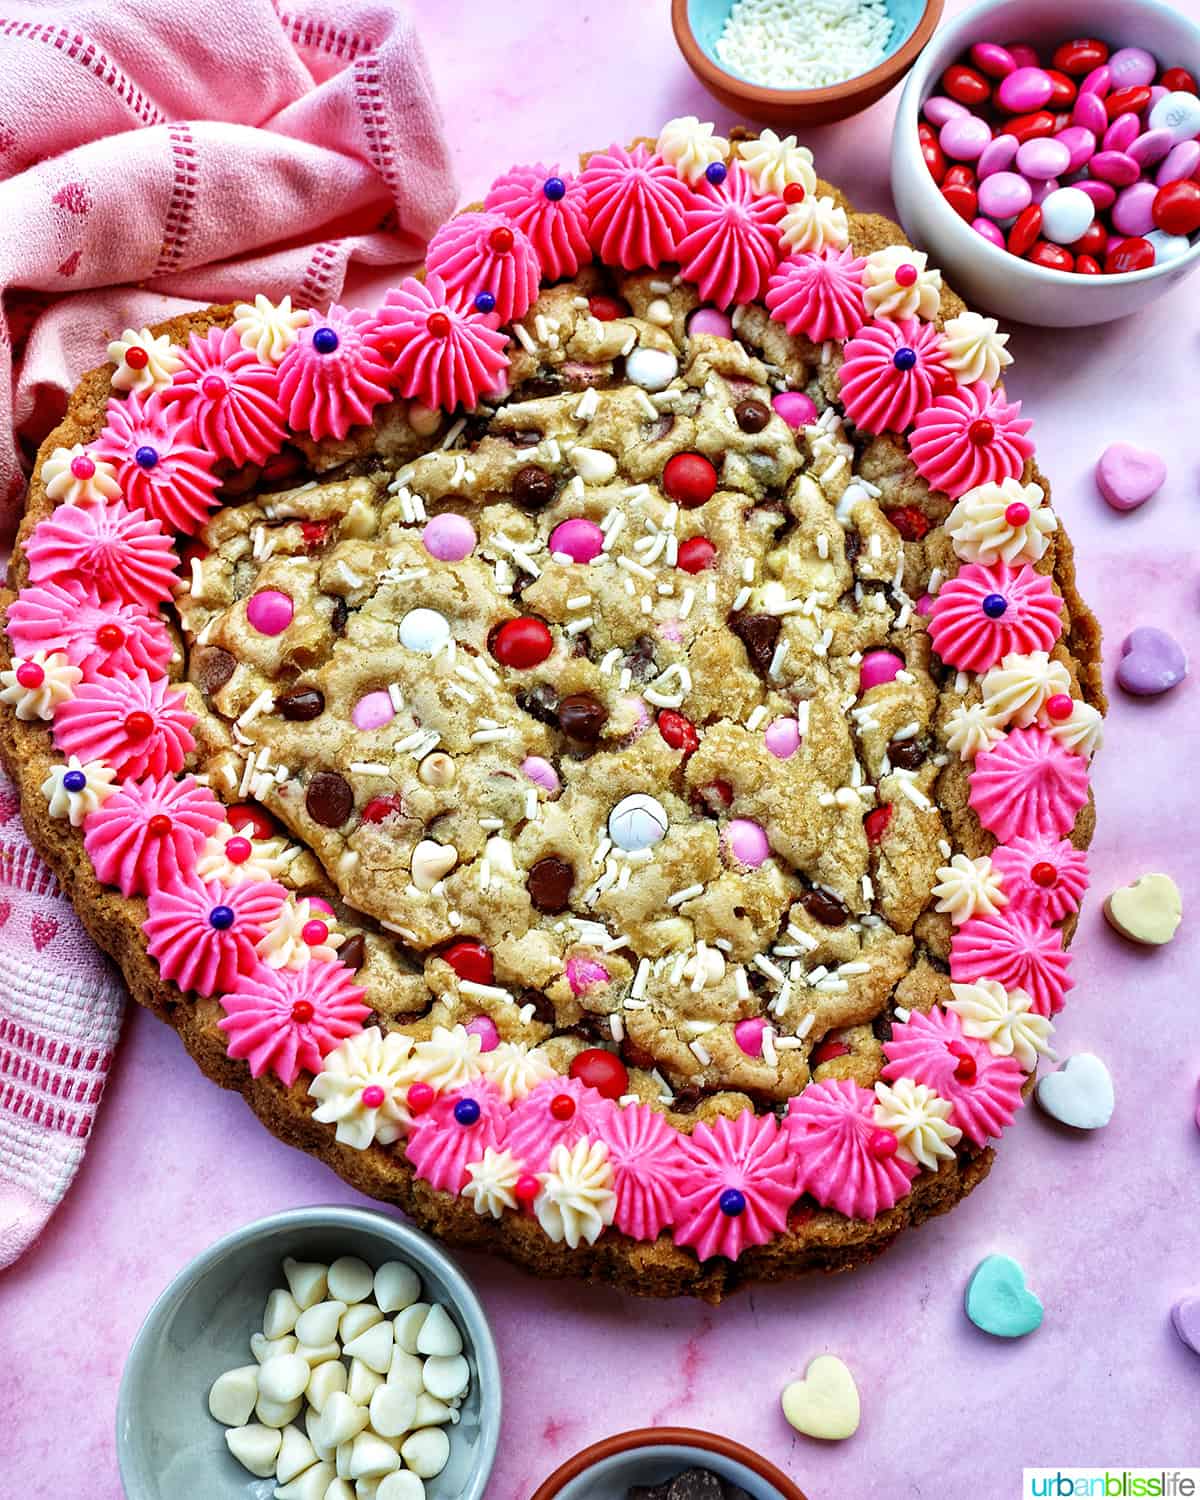 A heart-shaped Valentine's Day cookie cake with pink and white vanilla frosting and red, white, and pink M & M decorations.